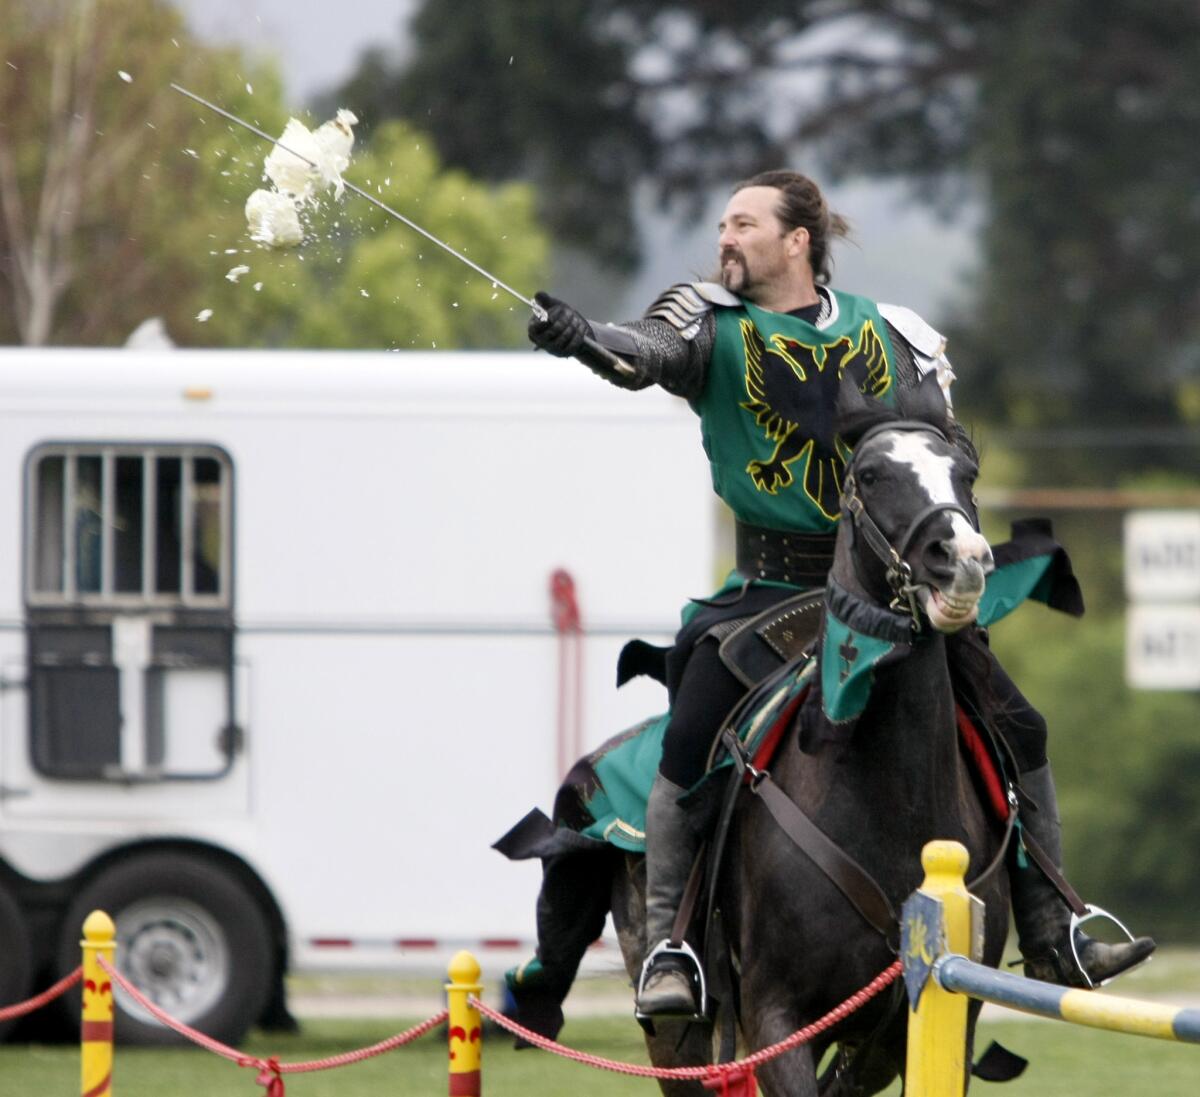 Knight Jason Houlihan slices through a cabbage with his sword during medieval jousting demonstration for Around The World in a Day at John Muir Middle School in Burbank on Friday, March 21, 2014.